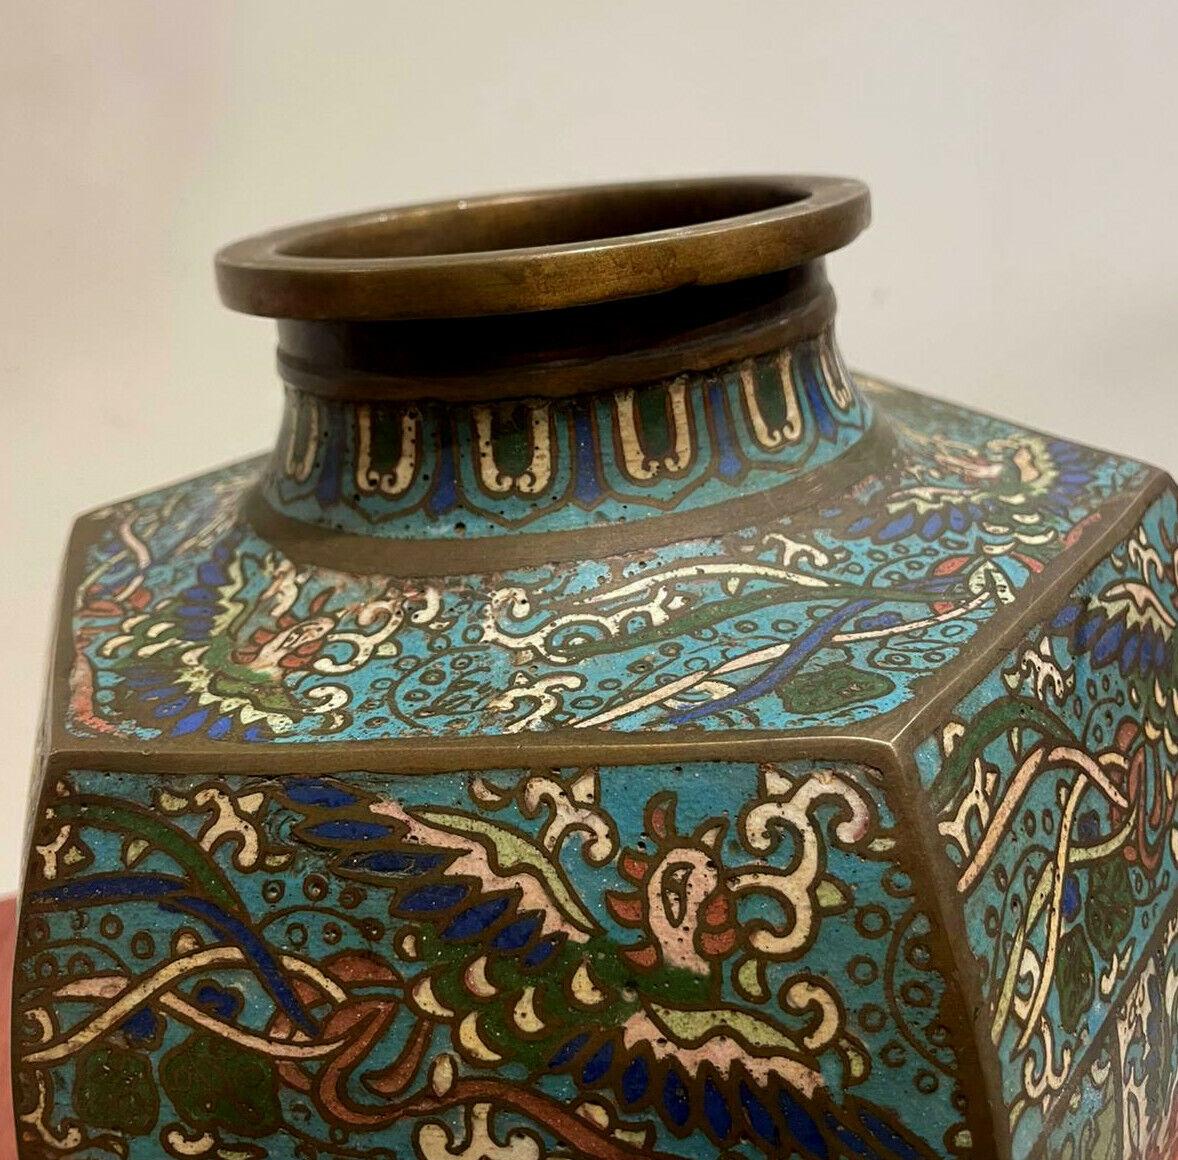 
An Antique mid-XIX century Chinese Qing Dynasty Vase
Cloisonné Enamel & Bronze

Vase is features phoenixes & cranes,
which symbolizes renewal & rebirth
& further decorated in floral motif

35cm high

in great condition